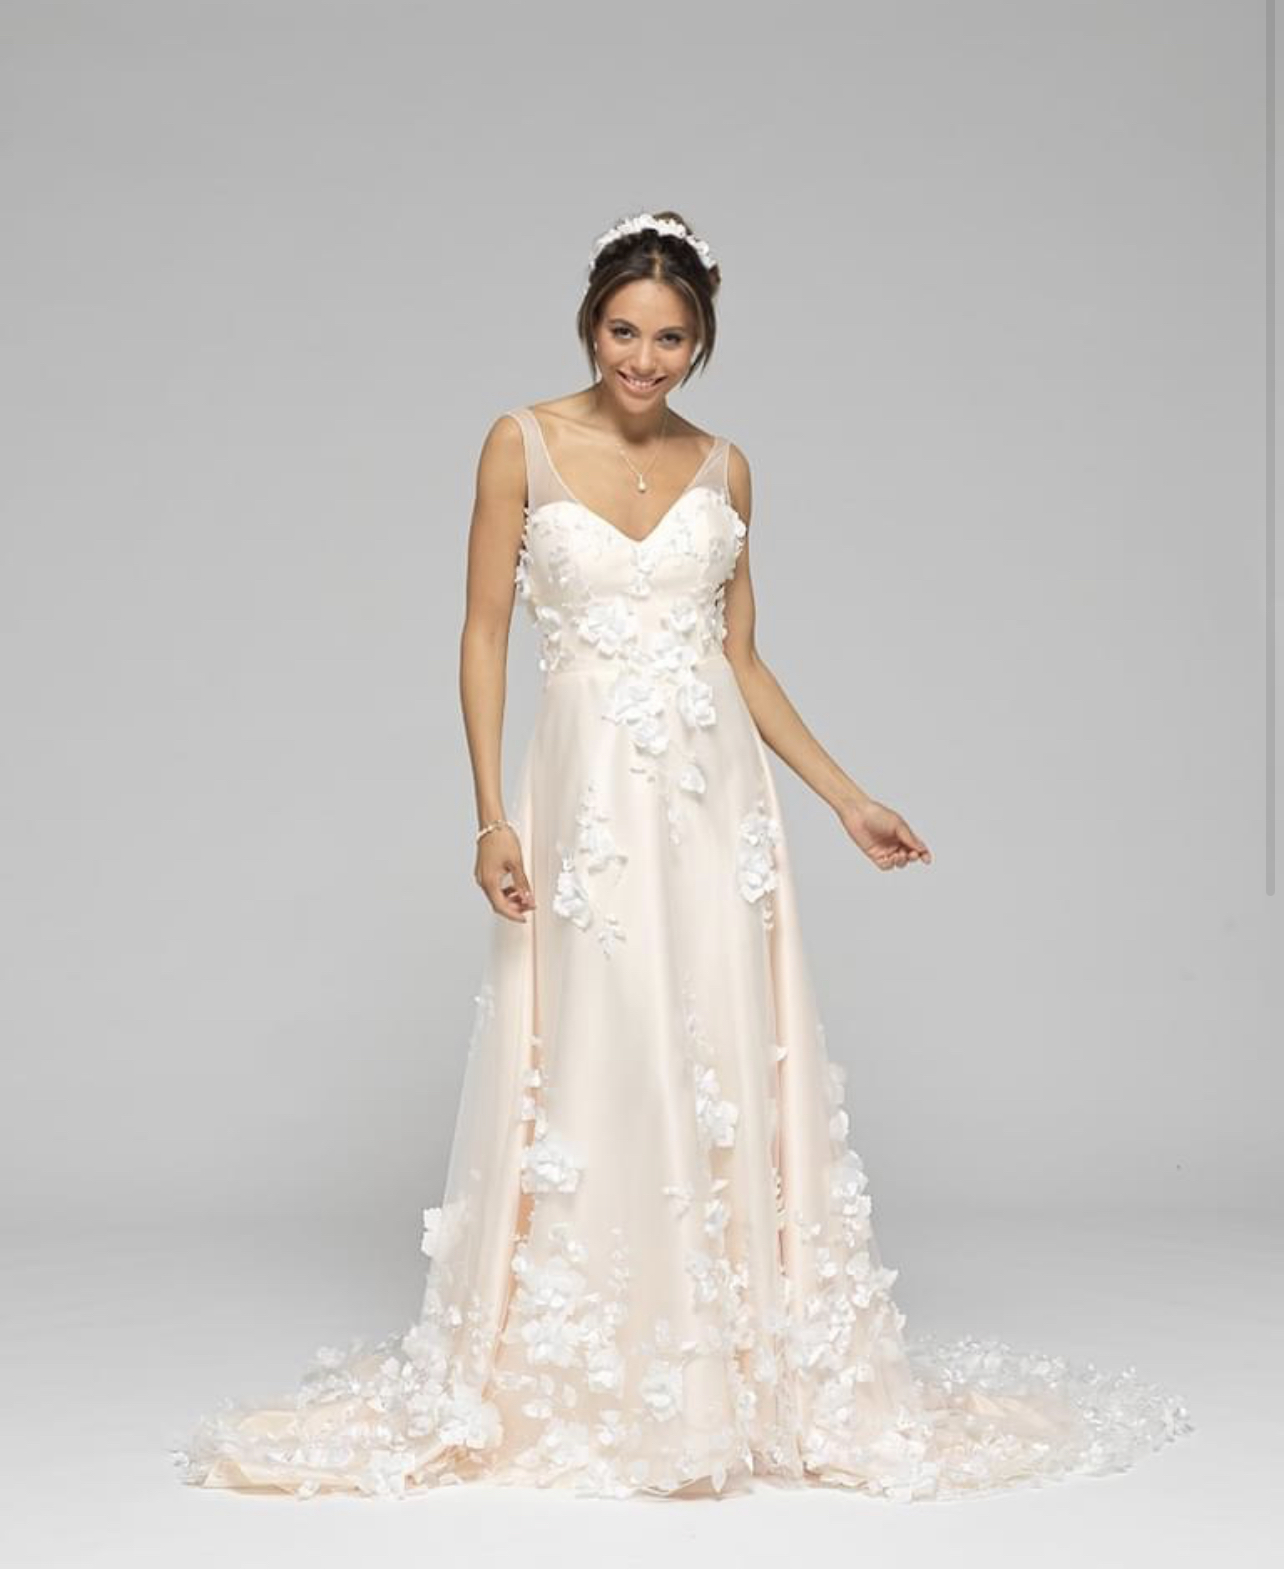 A wedding gown from the Shane Moore Designs Venus Collection